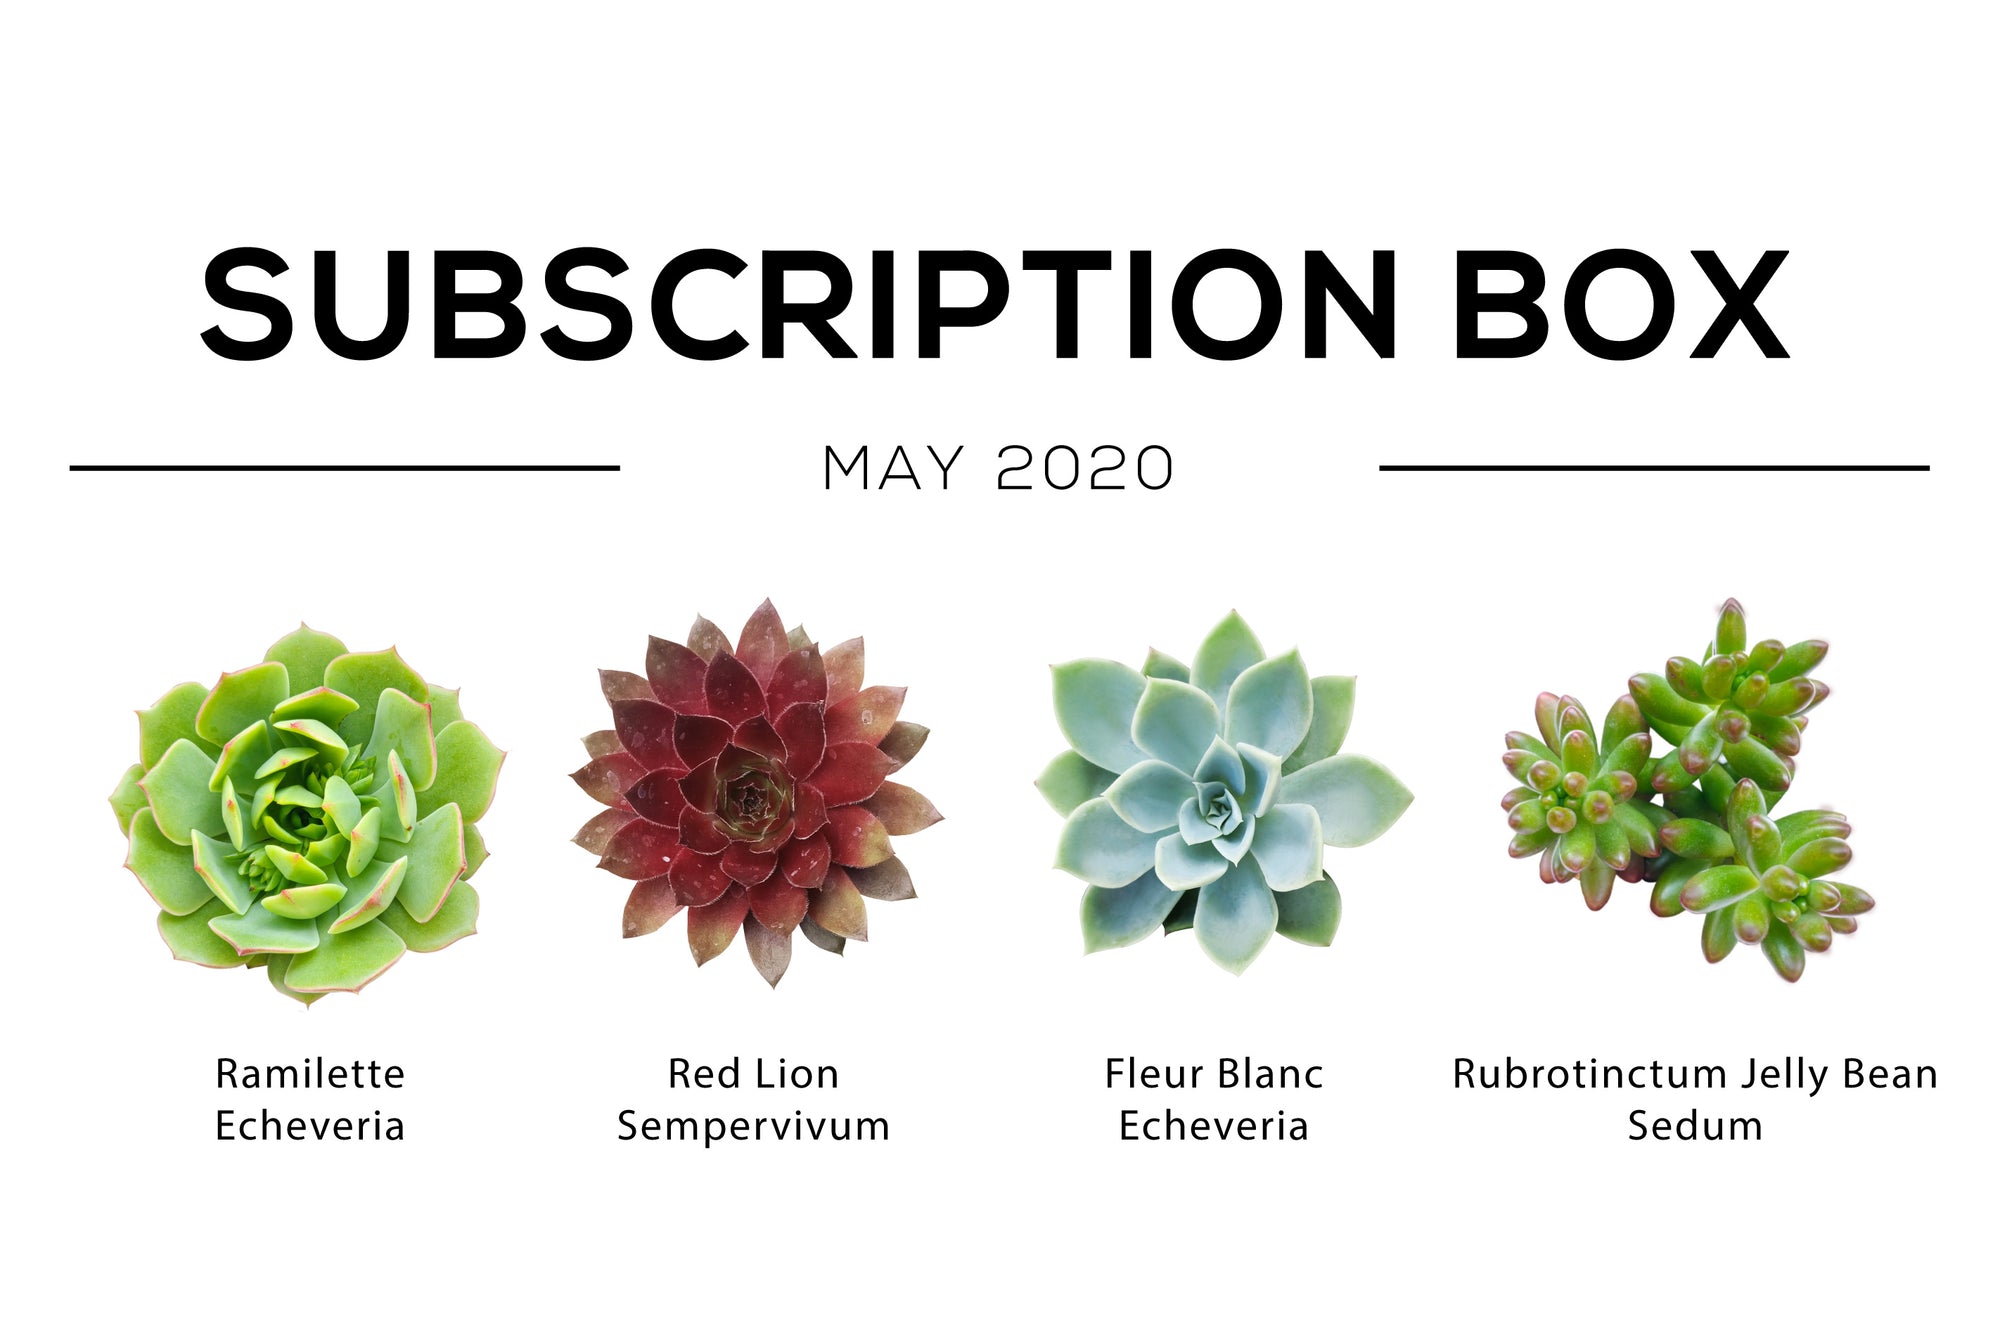 Succulents Subscription box monthly, Types of succulents, Succulents for sale, Succulent subscription gift monthly